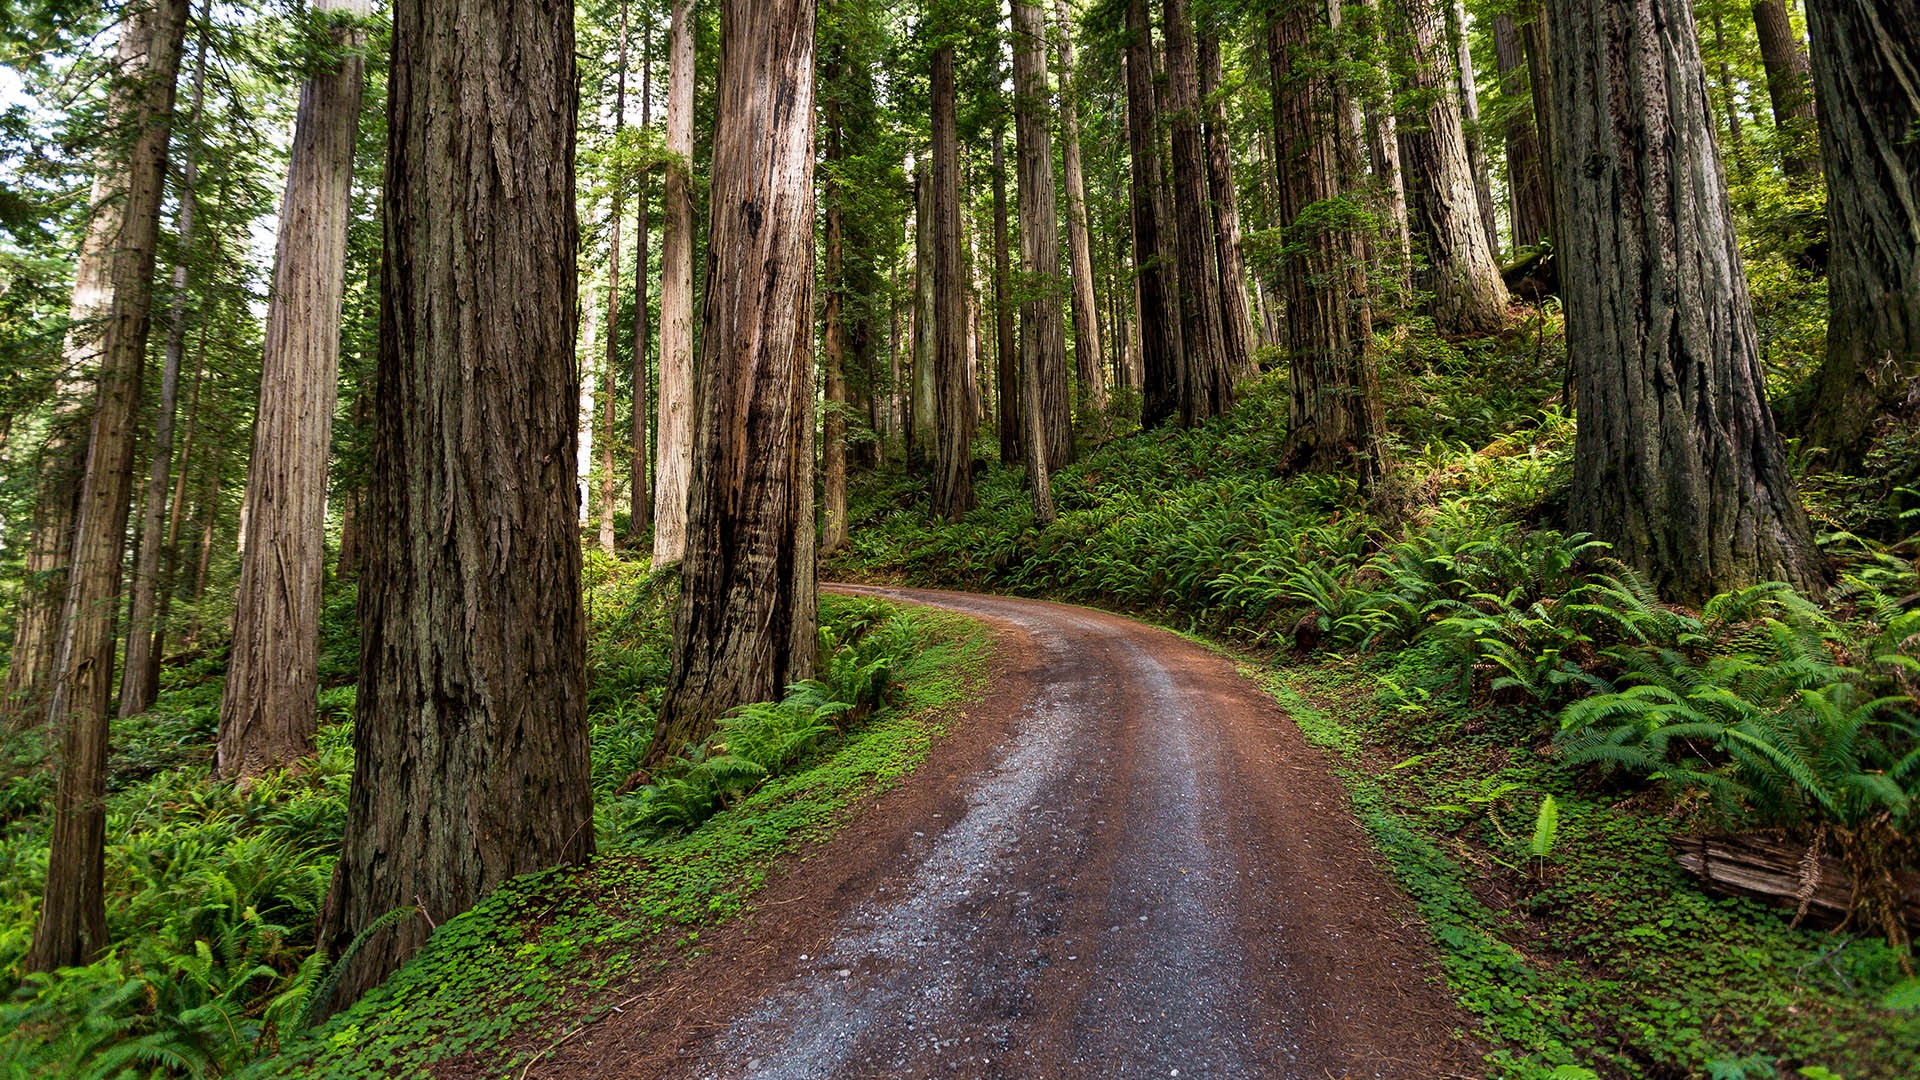 General 1920x1080 nature landscape forest plants redwood walkway dirt road California USA